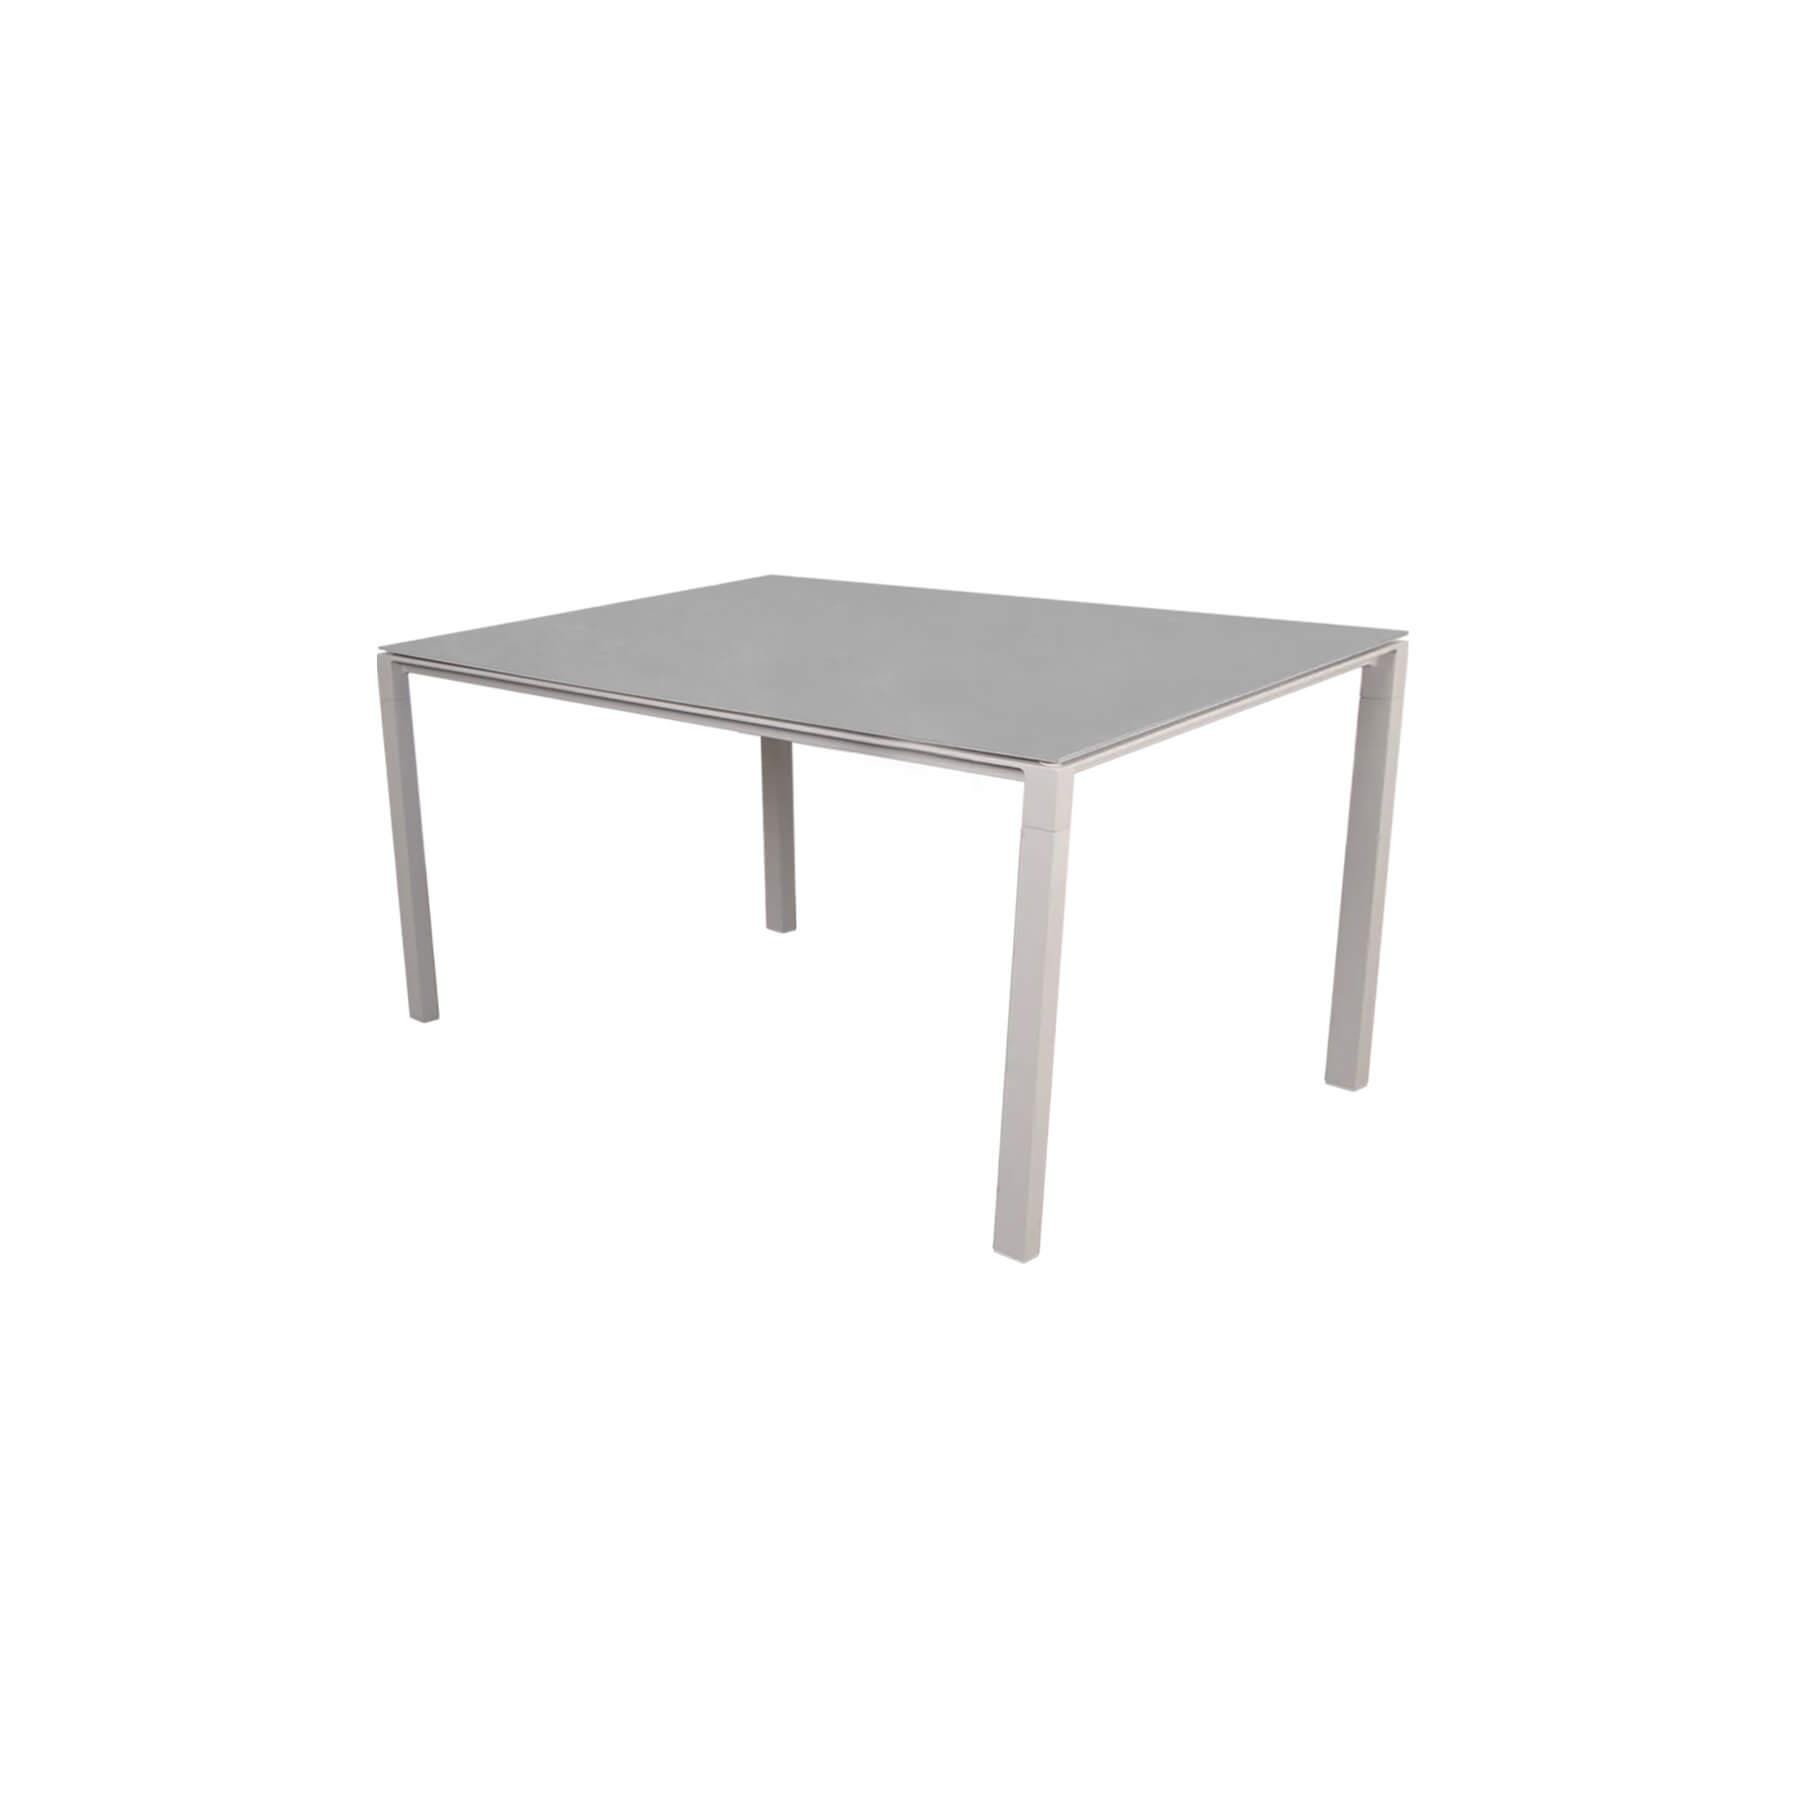 Caneline Pure Outdoor Dining Table Small Ceramic Concrete Grey Top Sand Legs